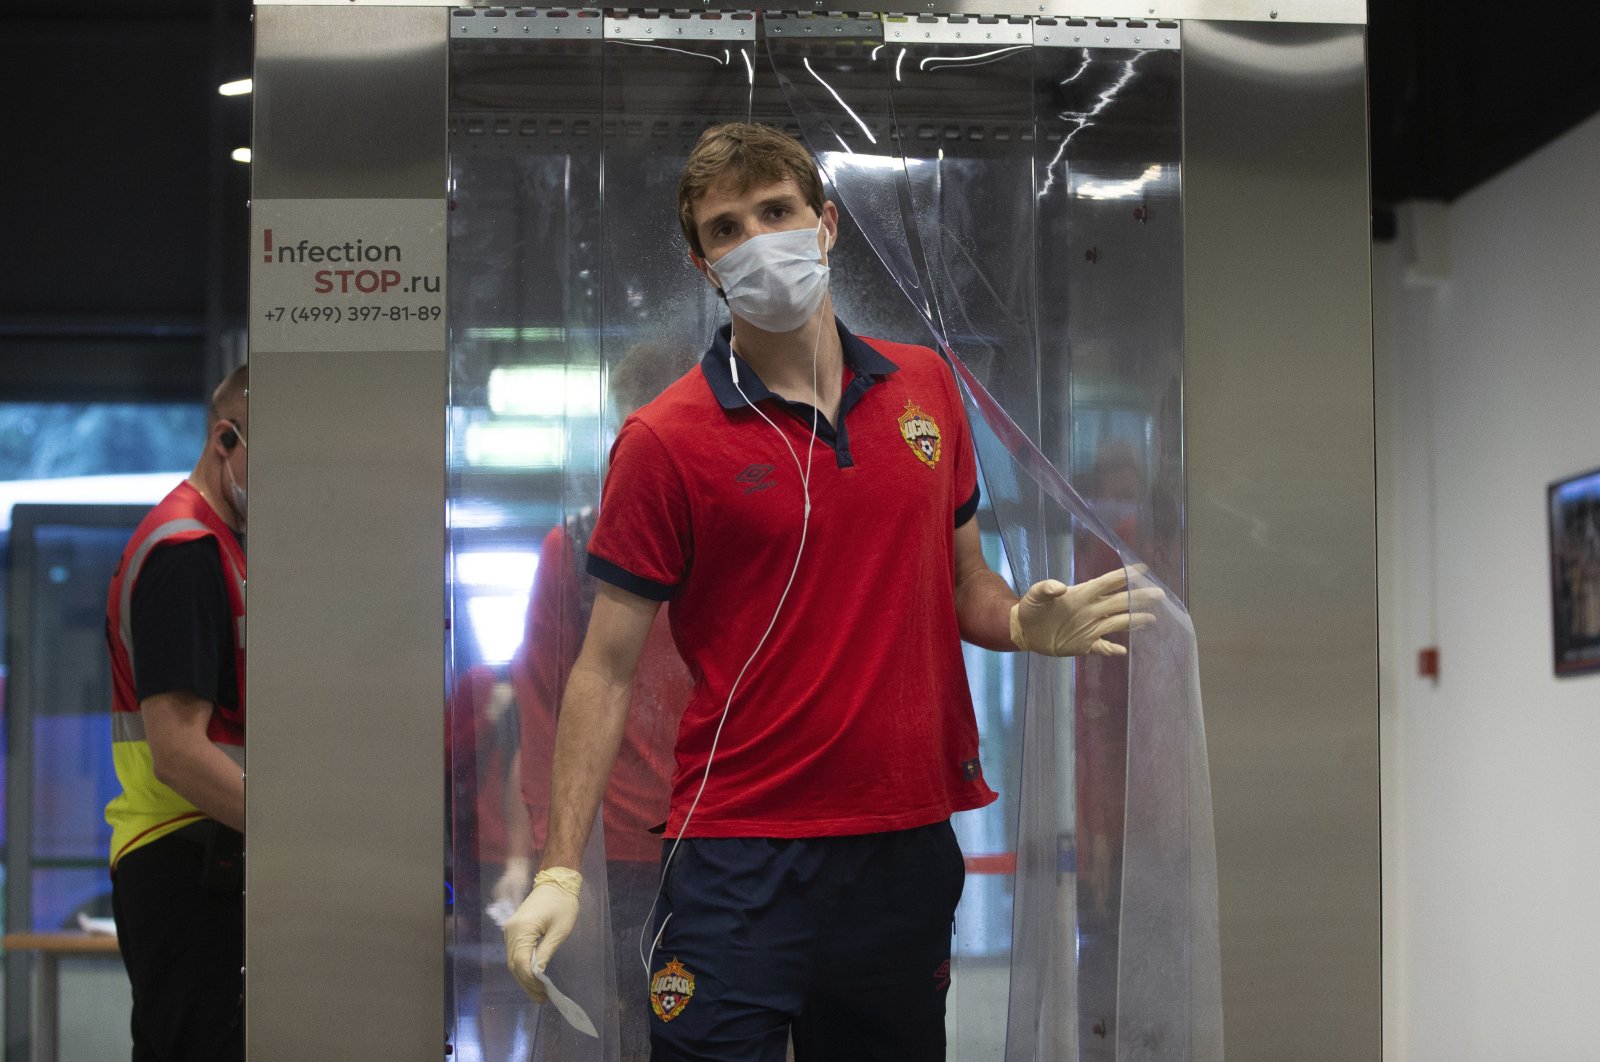 CSKA's Mario Fernandes, wearing face mask and gloves, passes through a disinfection tunnel to protect the spread of coronavirus before the Russia Soccer Premier League soccer match between CSKA Moscow and Zenit St. Petersburg at CSKA Arena in Moscow, Russia, June 20, 2020. (Denis Tyrin, PFC CSKA Pool photo via AP)